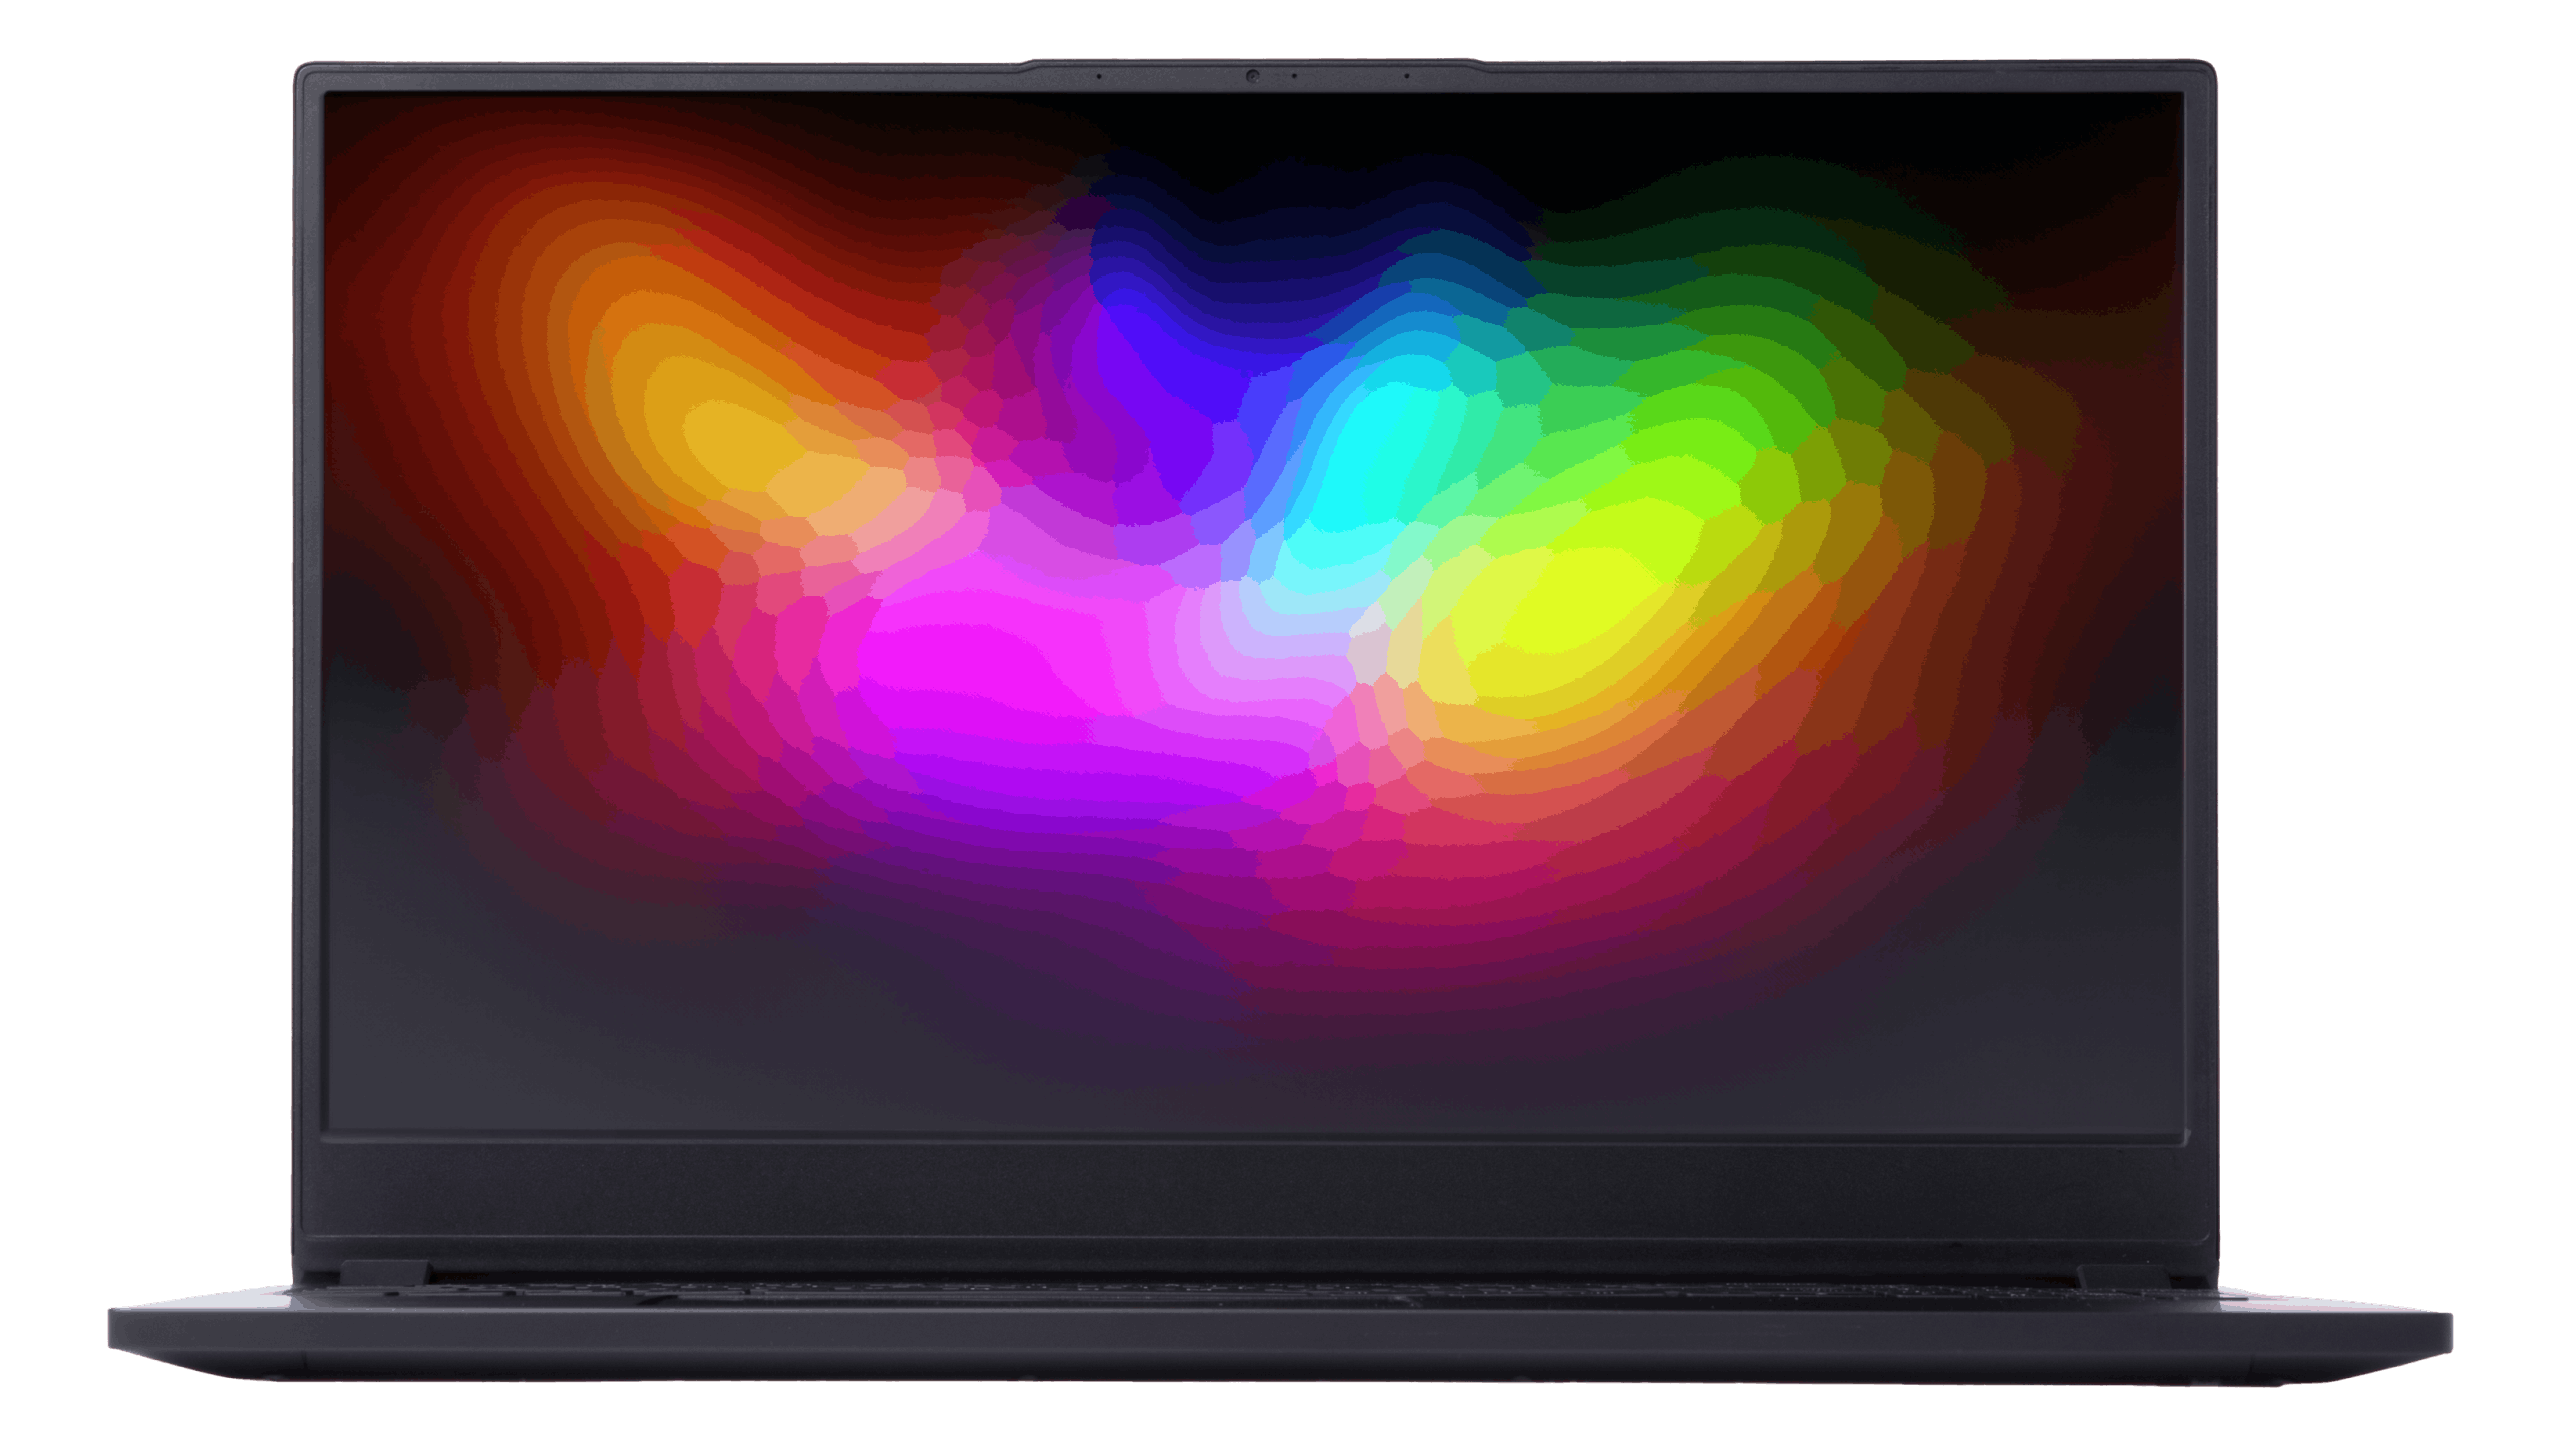 Pangolin laptop with vibrant display of 100% sRGB color pictured from the front with colorful rainbow wallpaper